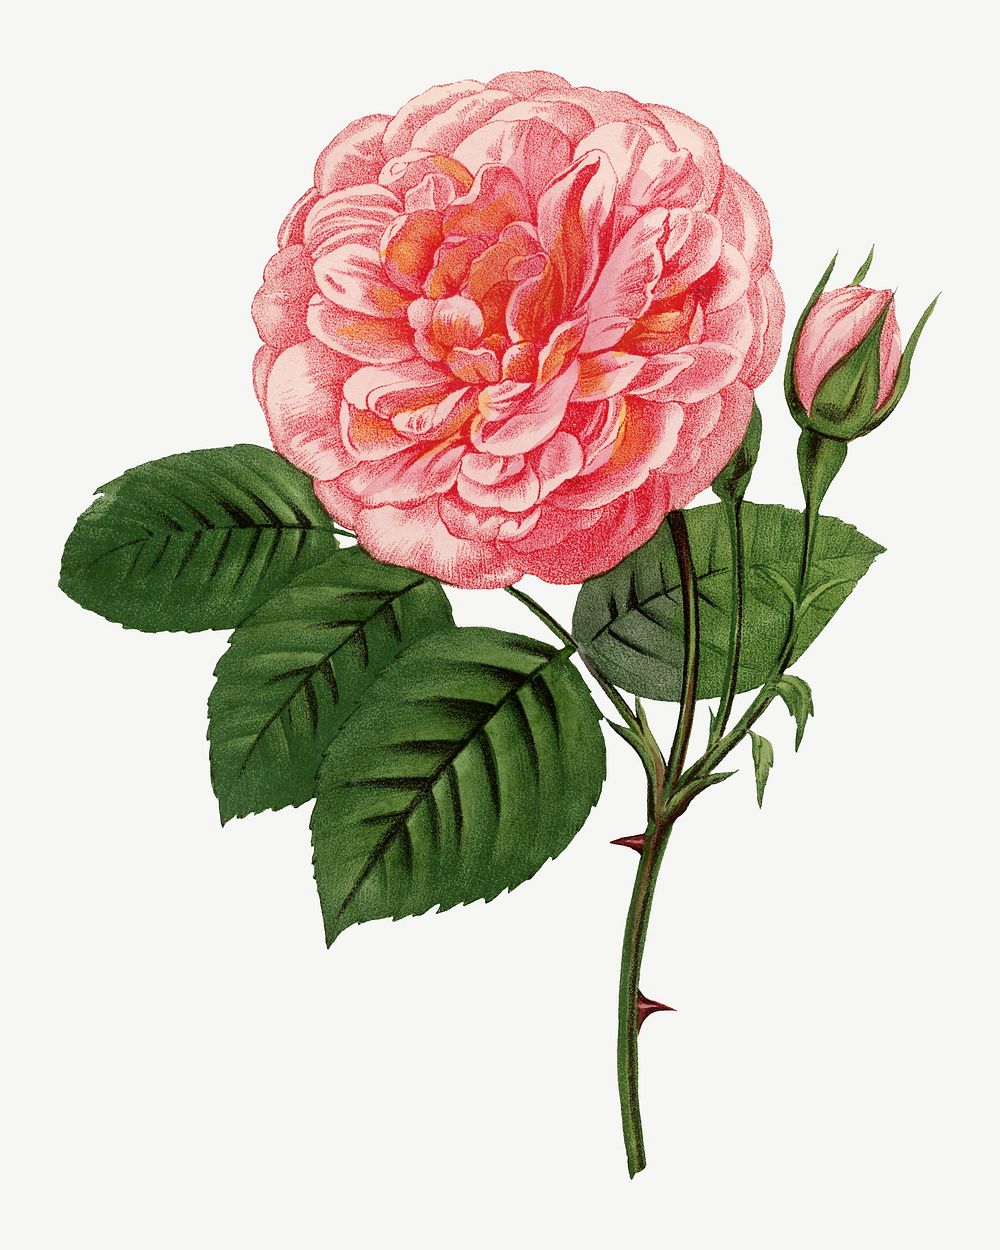 Pink rose, vintage French flower collage element psd  by François-Frédéric Grobon. Remixed by rawpixel.